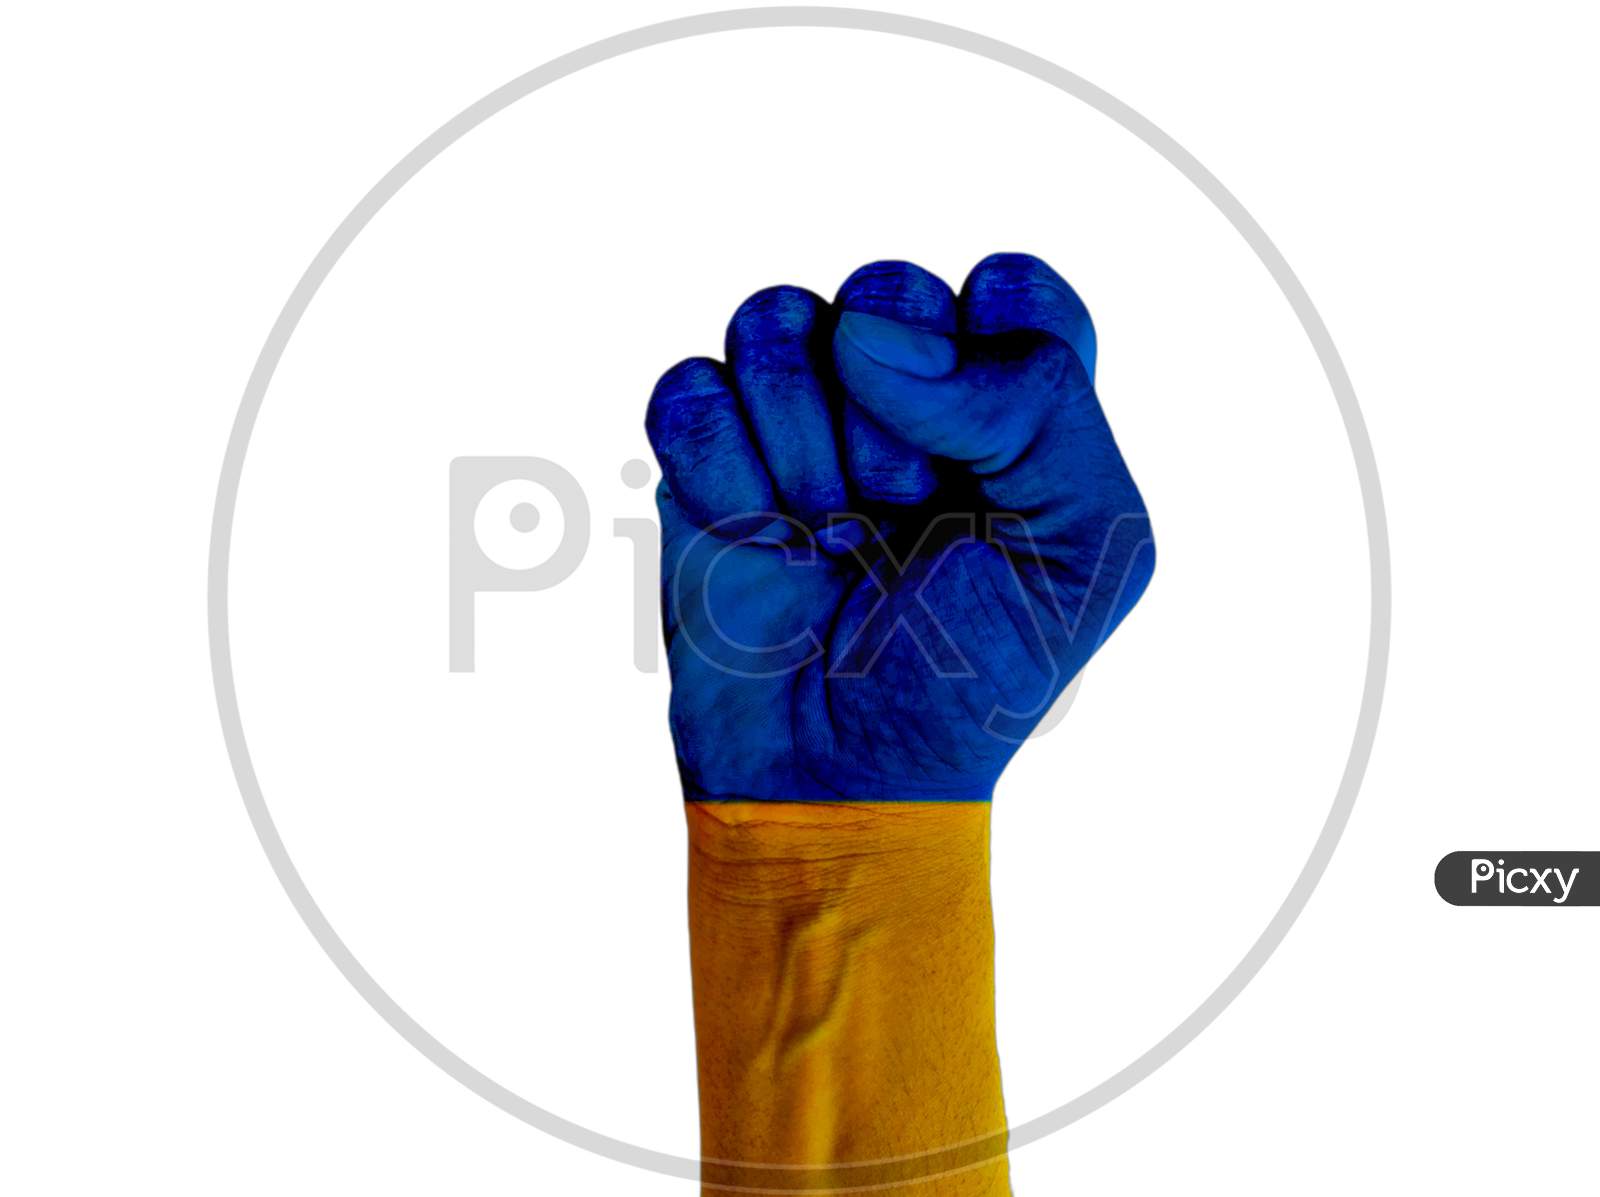 A Solidarity With Ukraine Abstract Background With Painted Fist. Patriotic And Togetherness Concept. Standing With Ukraine Backdrop. Pray For Ukraine